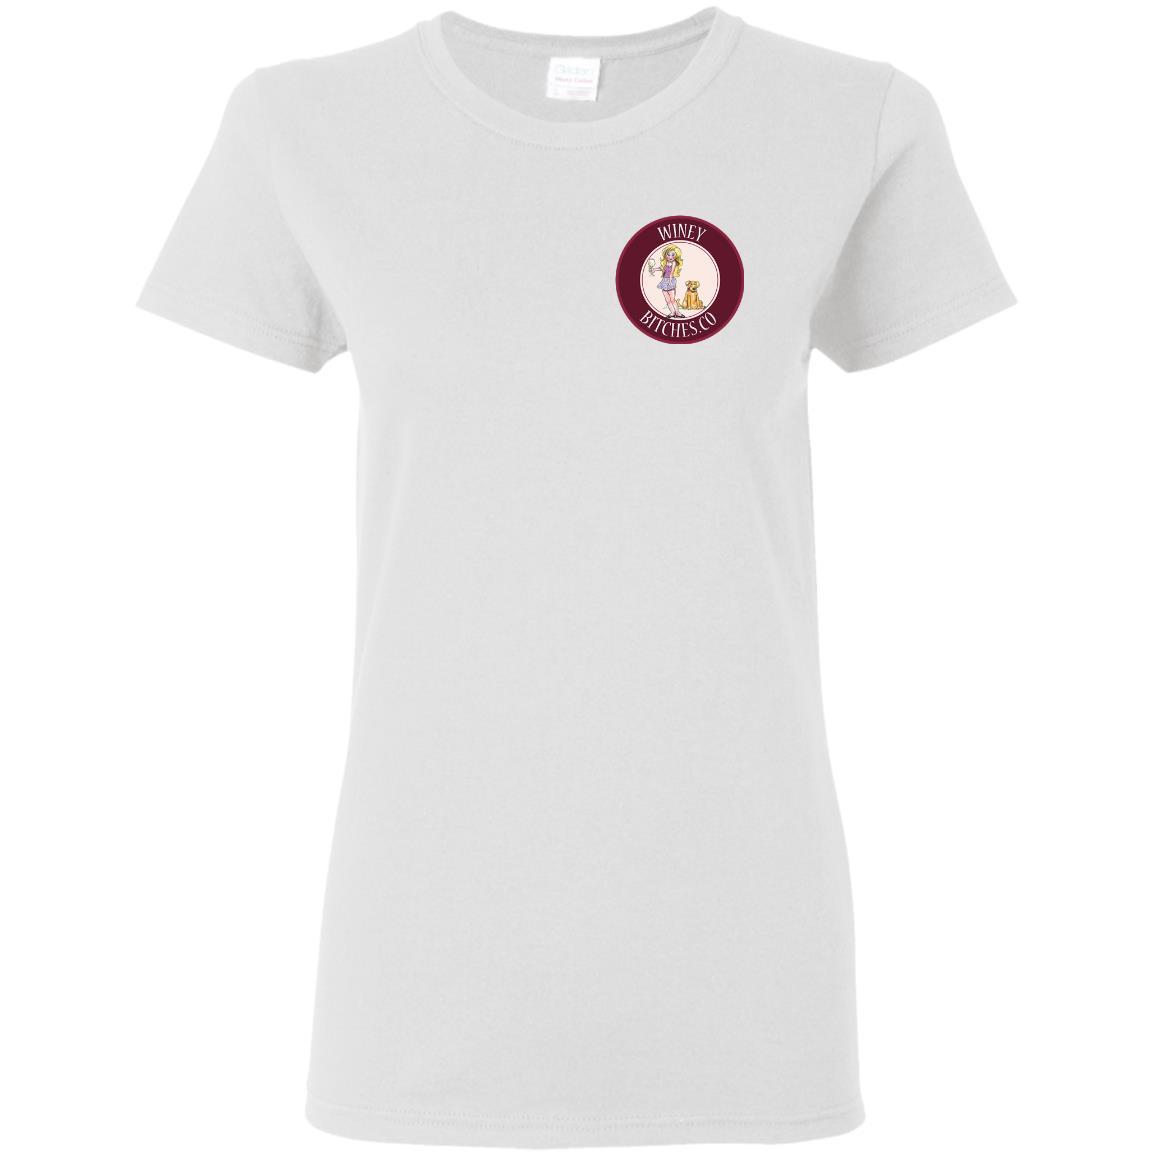 T-Shirts White / S WineyBitches.co Hilariously Funny "Count Me In" Ladies T-Shirt for Wine & Dog Lovers WineyBitchesCo